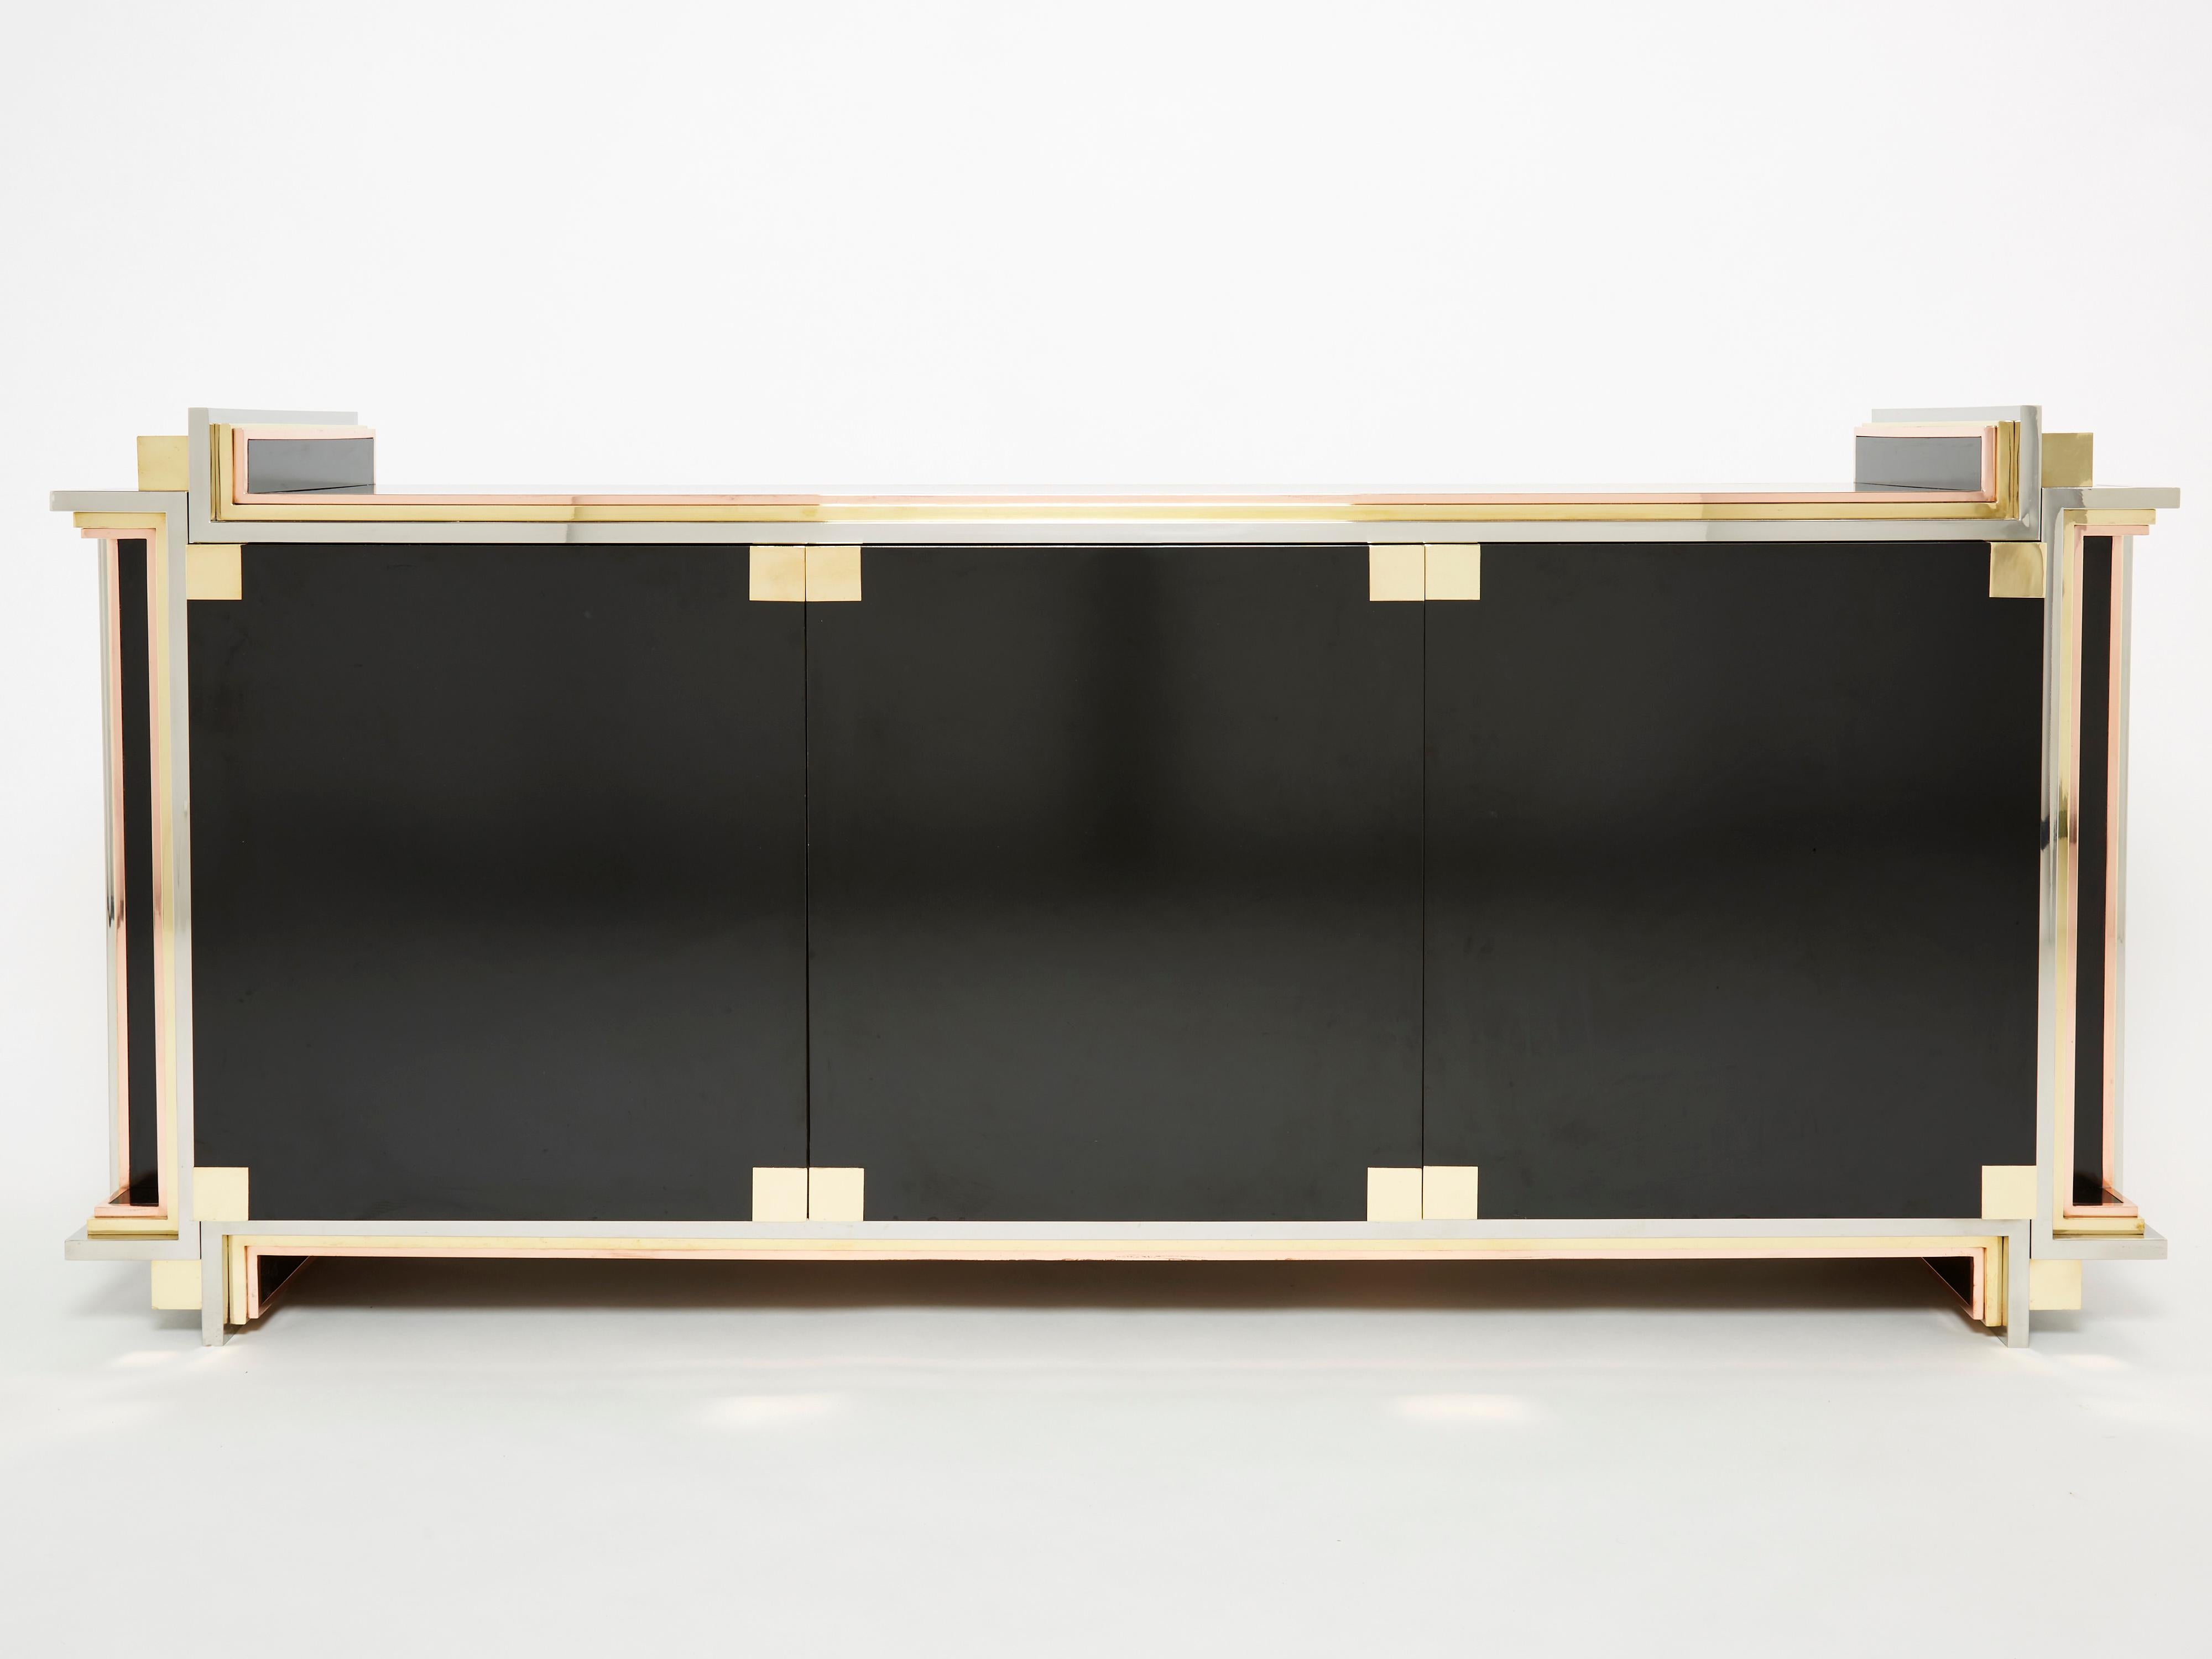 A unique and timeless vintage piece, this mid-century sideboard feels imposing and glamourous, with straight lines of brass copper and chrome adorning its exterior of reflective black lacquer. It was designed by Alain Delon and edited by Maison